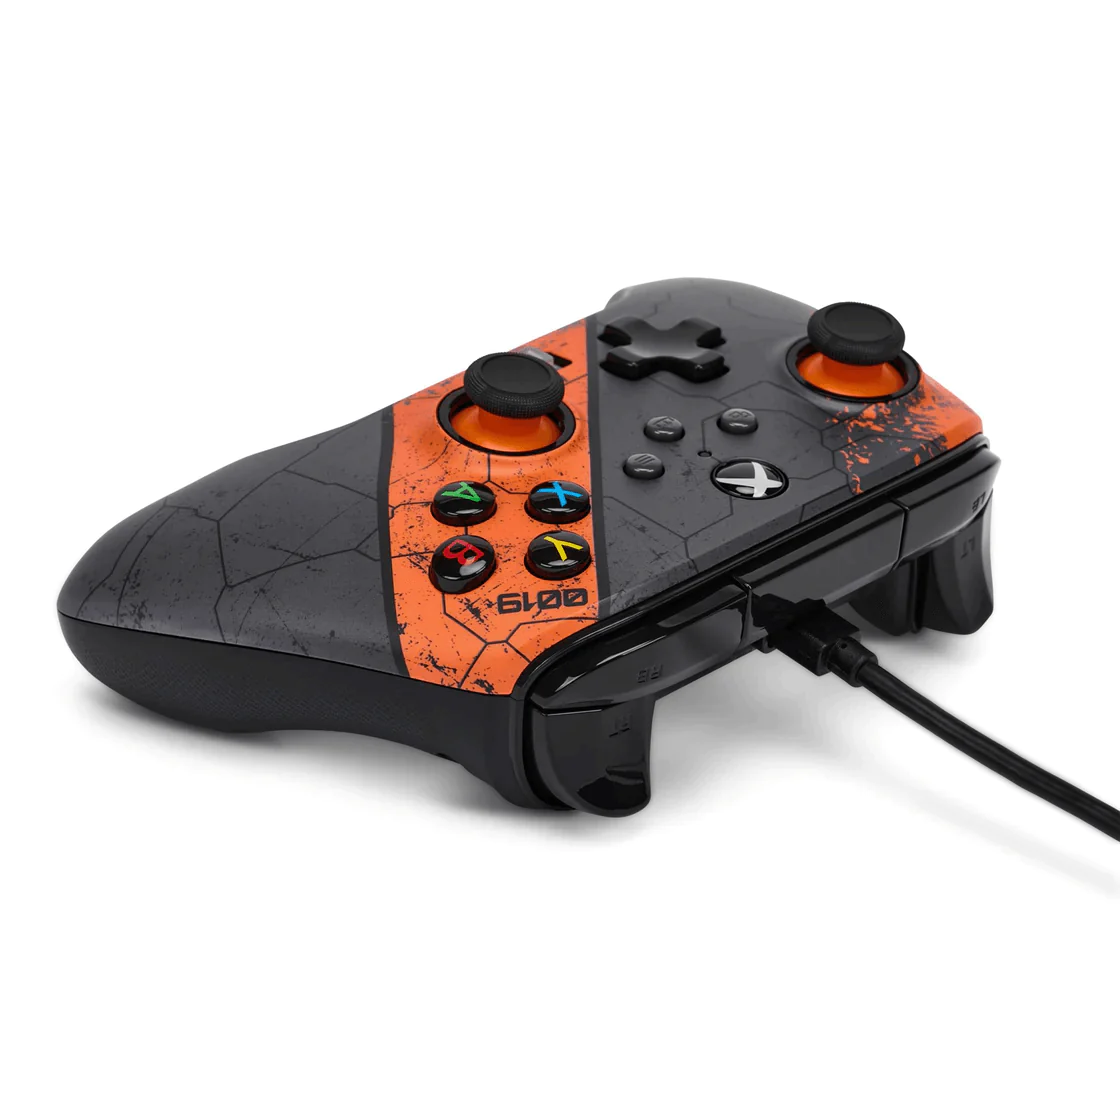 PowerA Enhanced Wired Controller for Xbox Series X/S- Galactic Mission